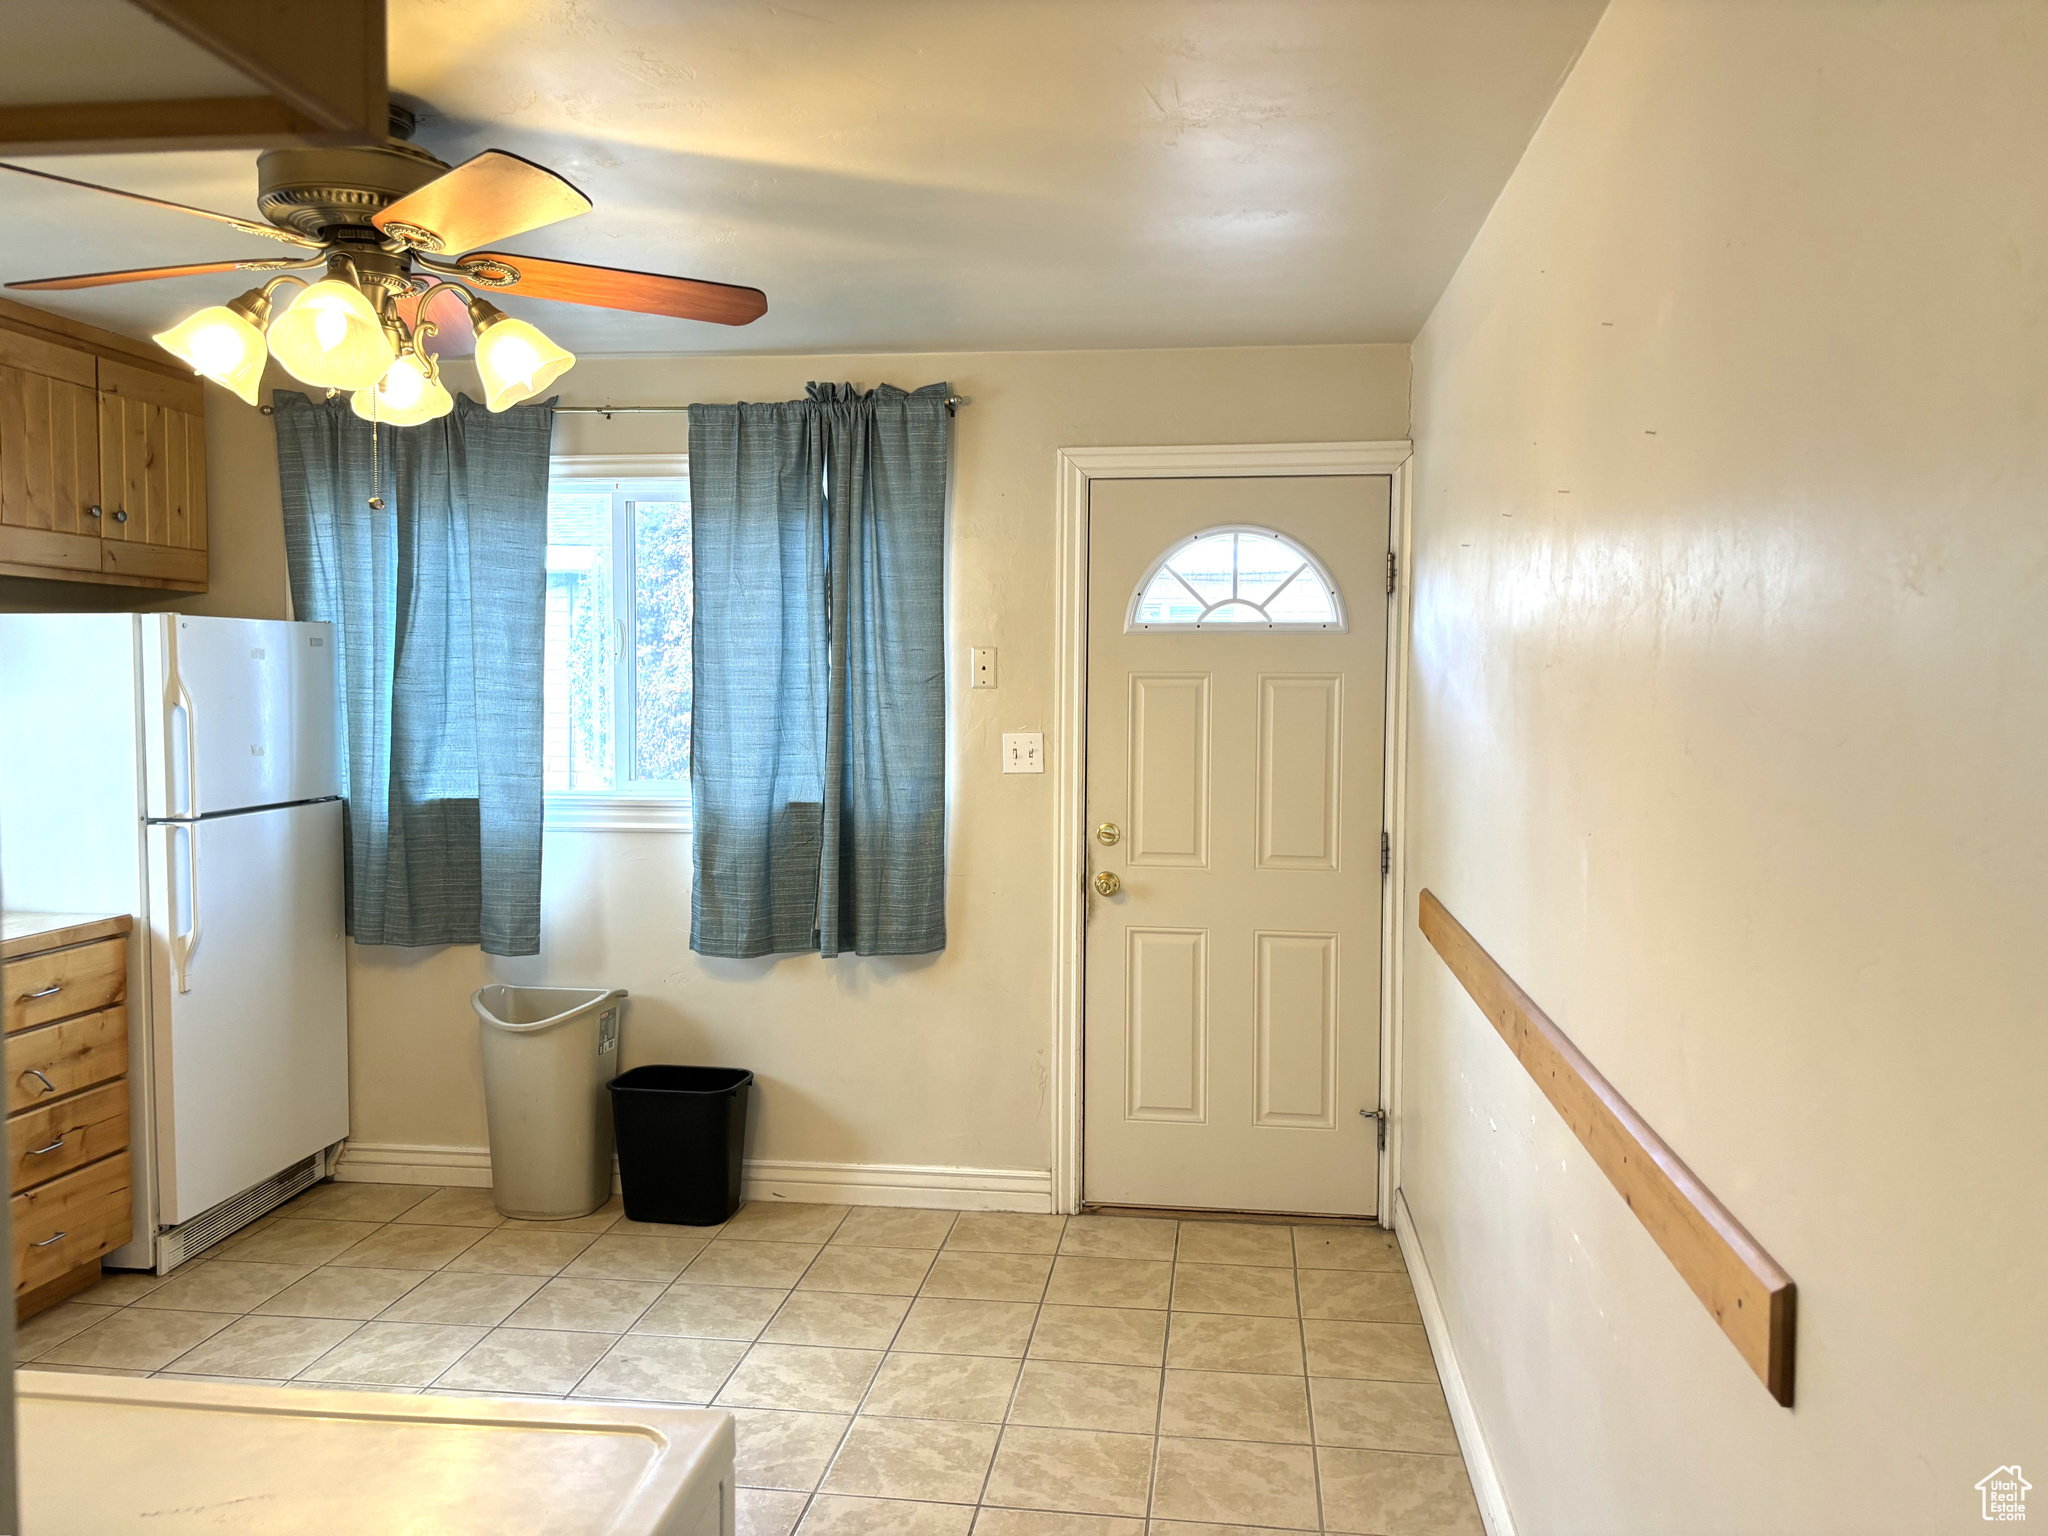 Tiled foyer with ceiling fan and a healthy amount of sunlight